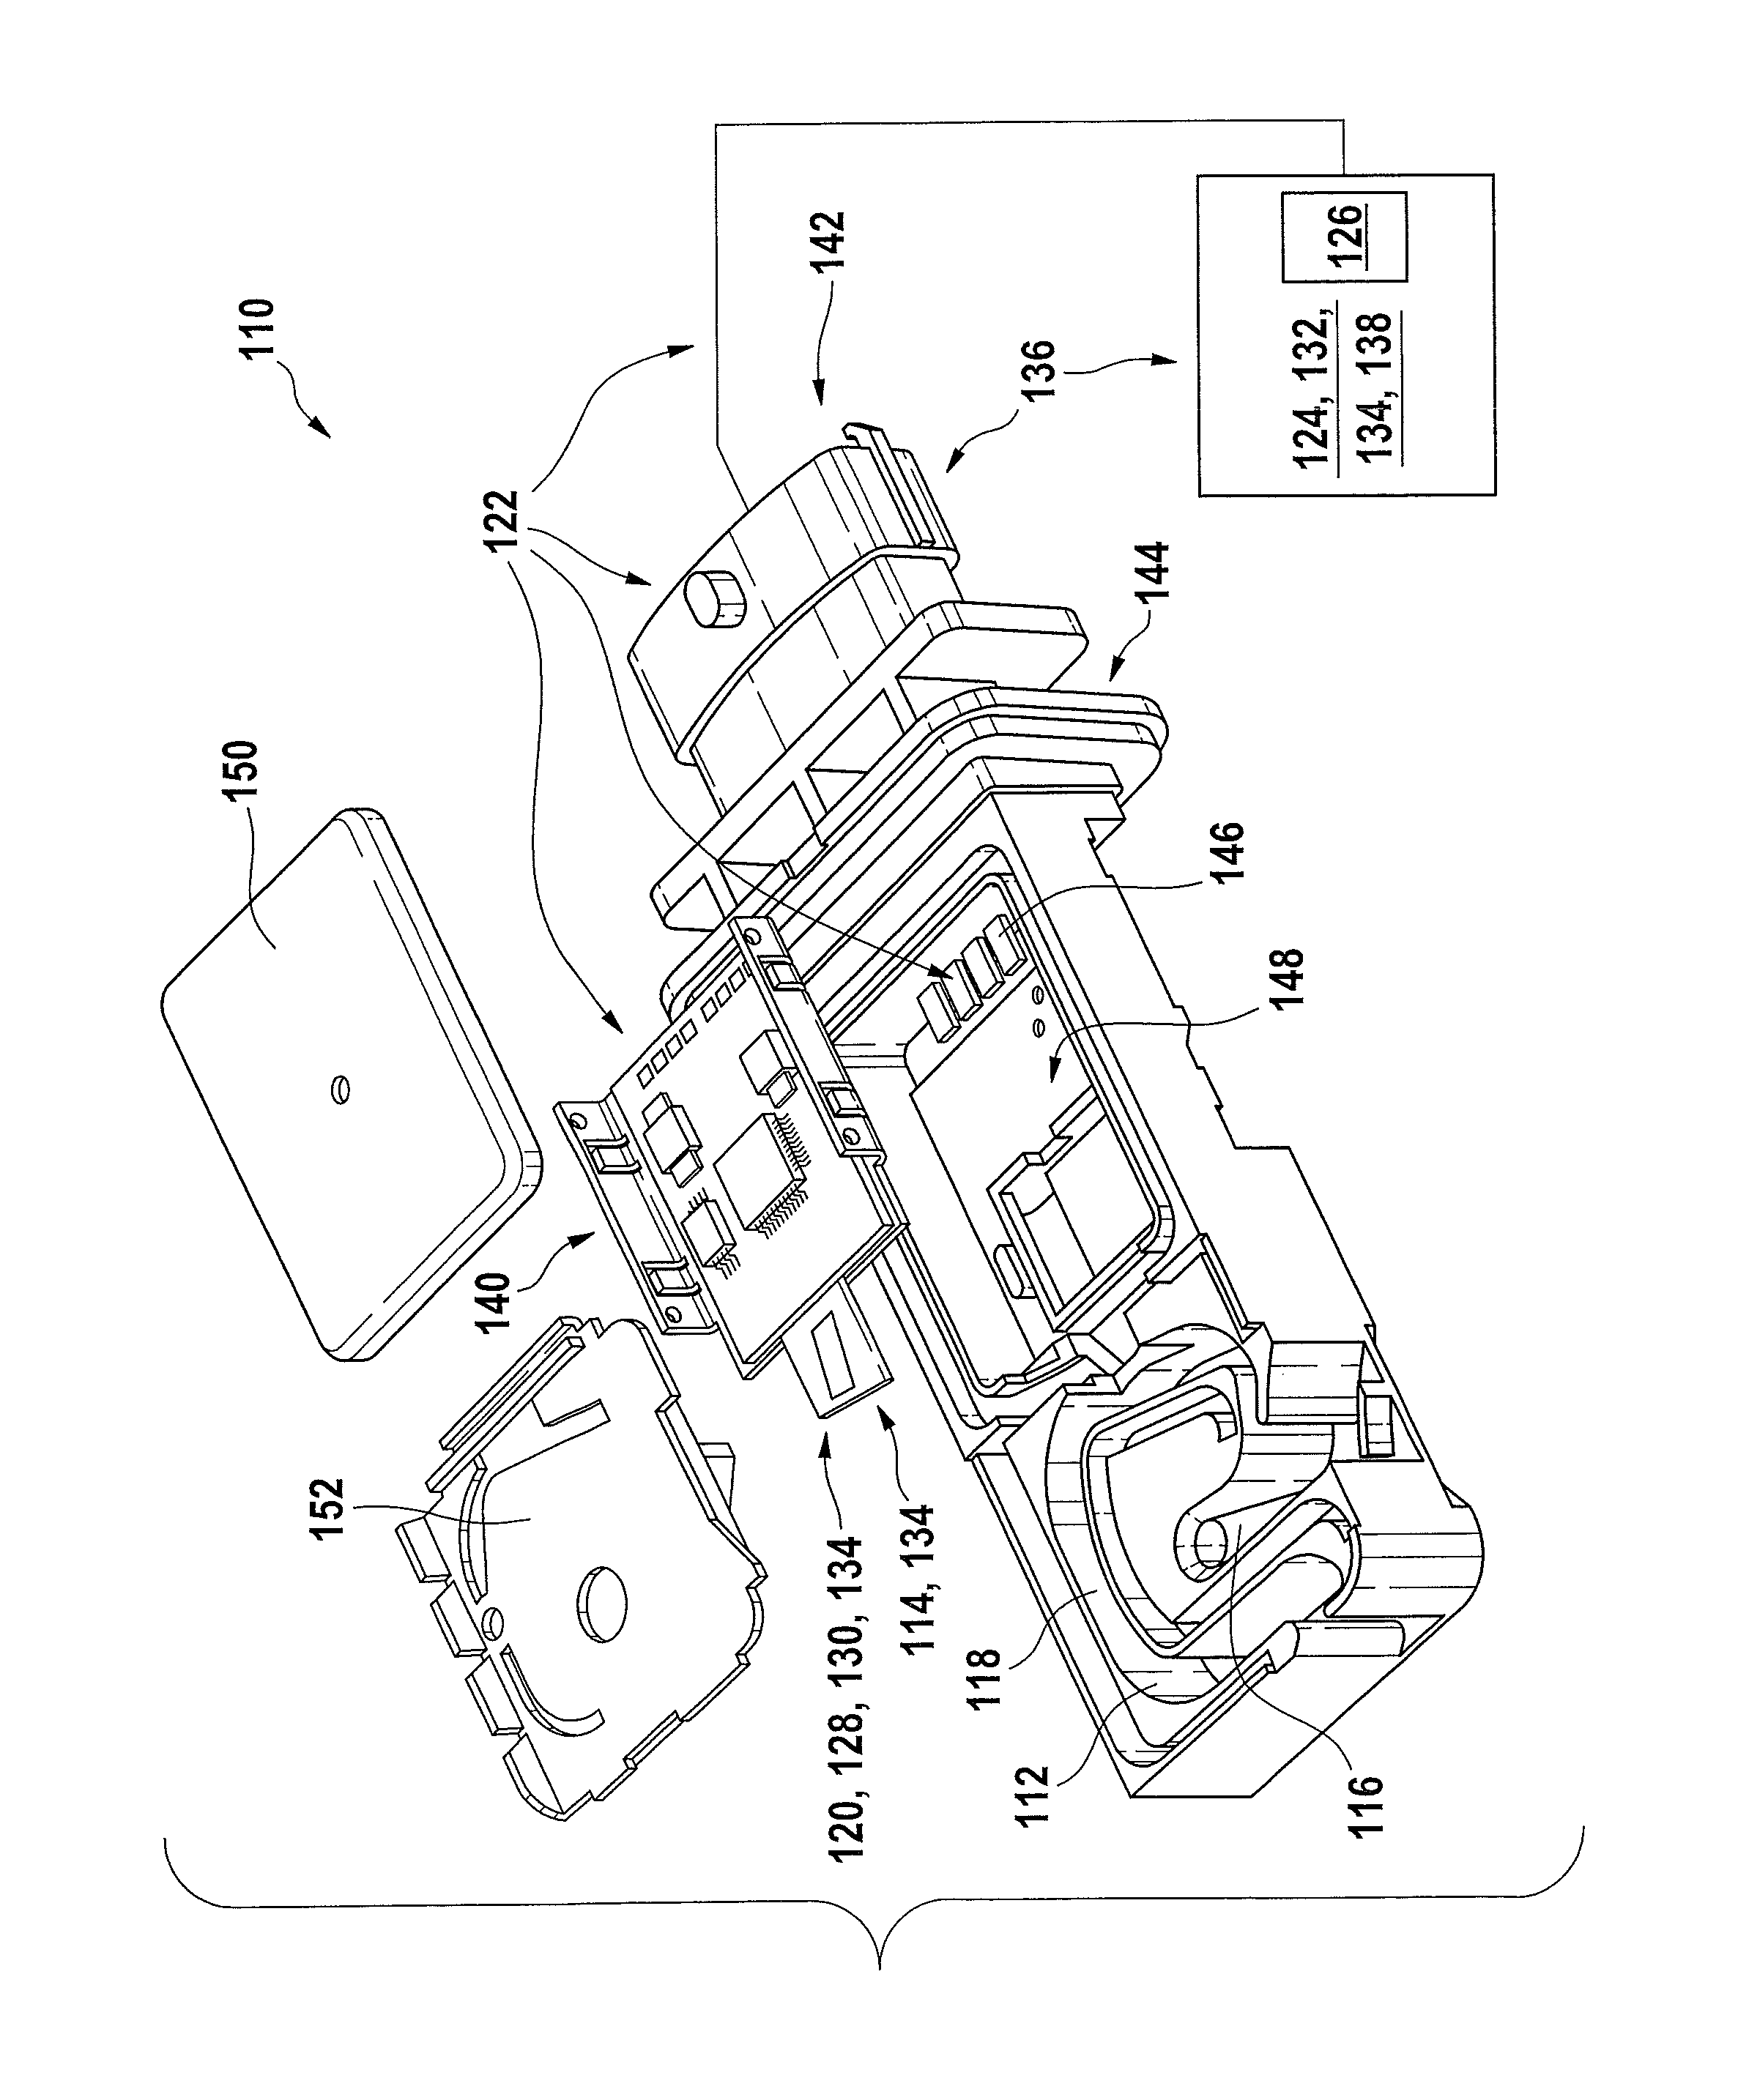 Device for detecting at least one flow characteristic of a fluid medium